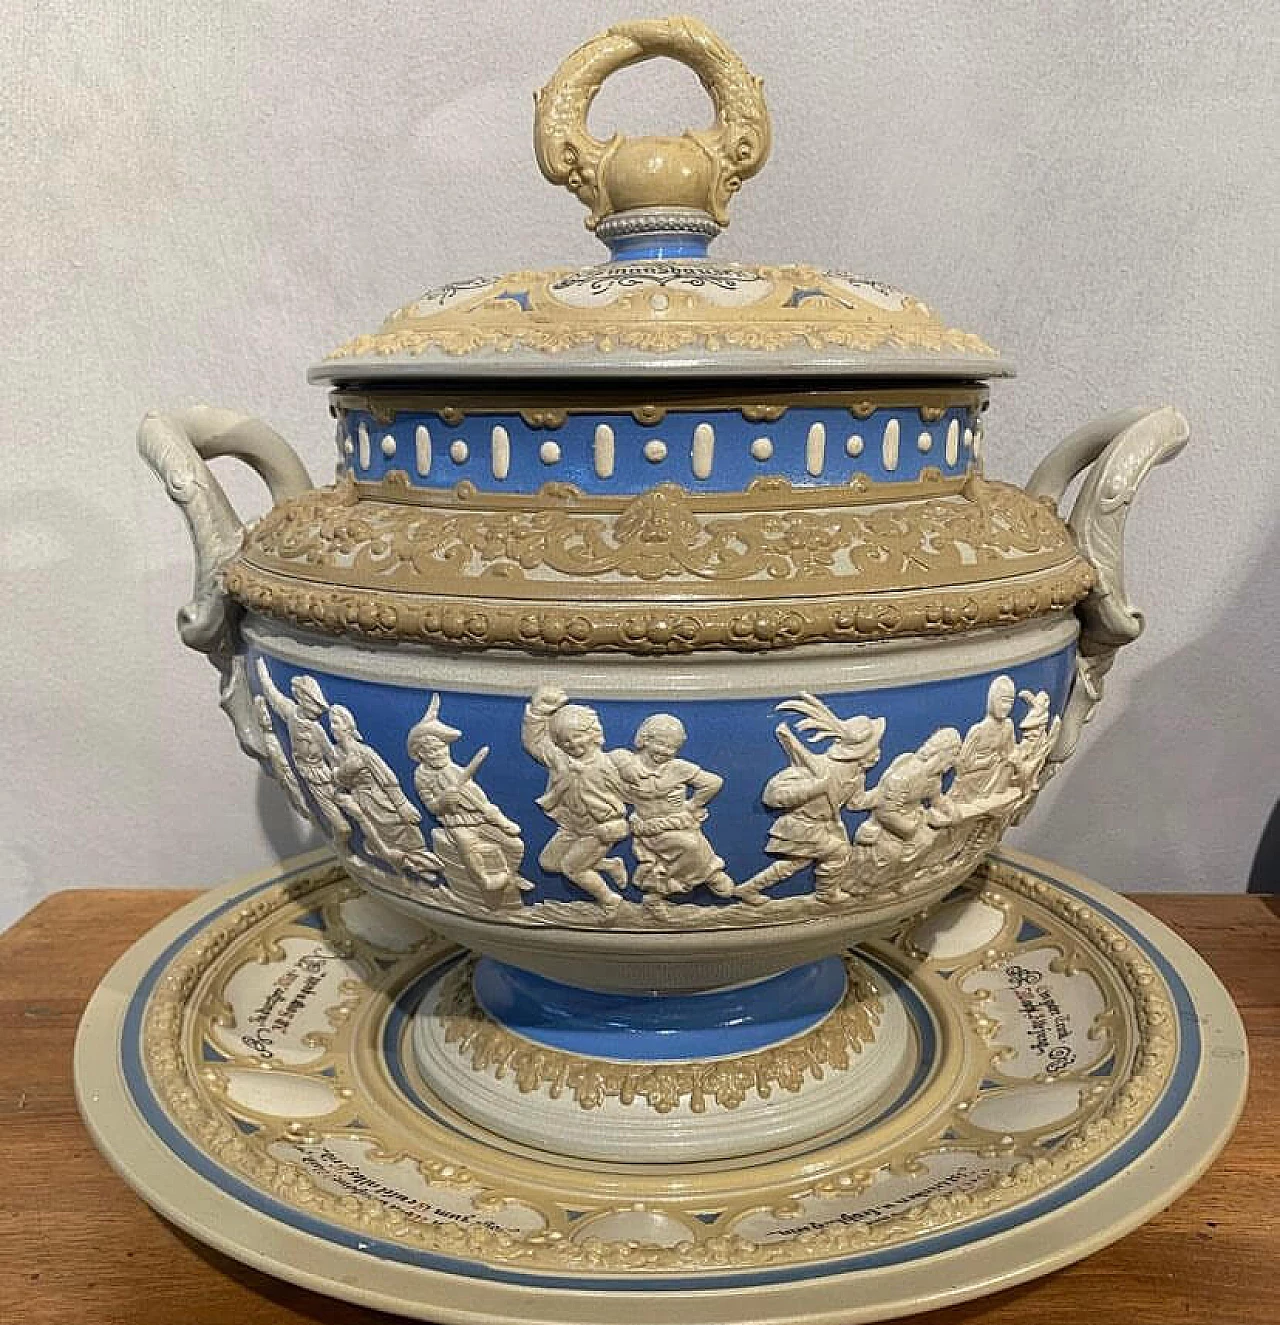 Decorated ceramic soup tureen for Villeroy and Boch, early 20th century 2